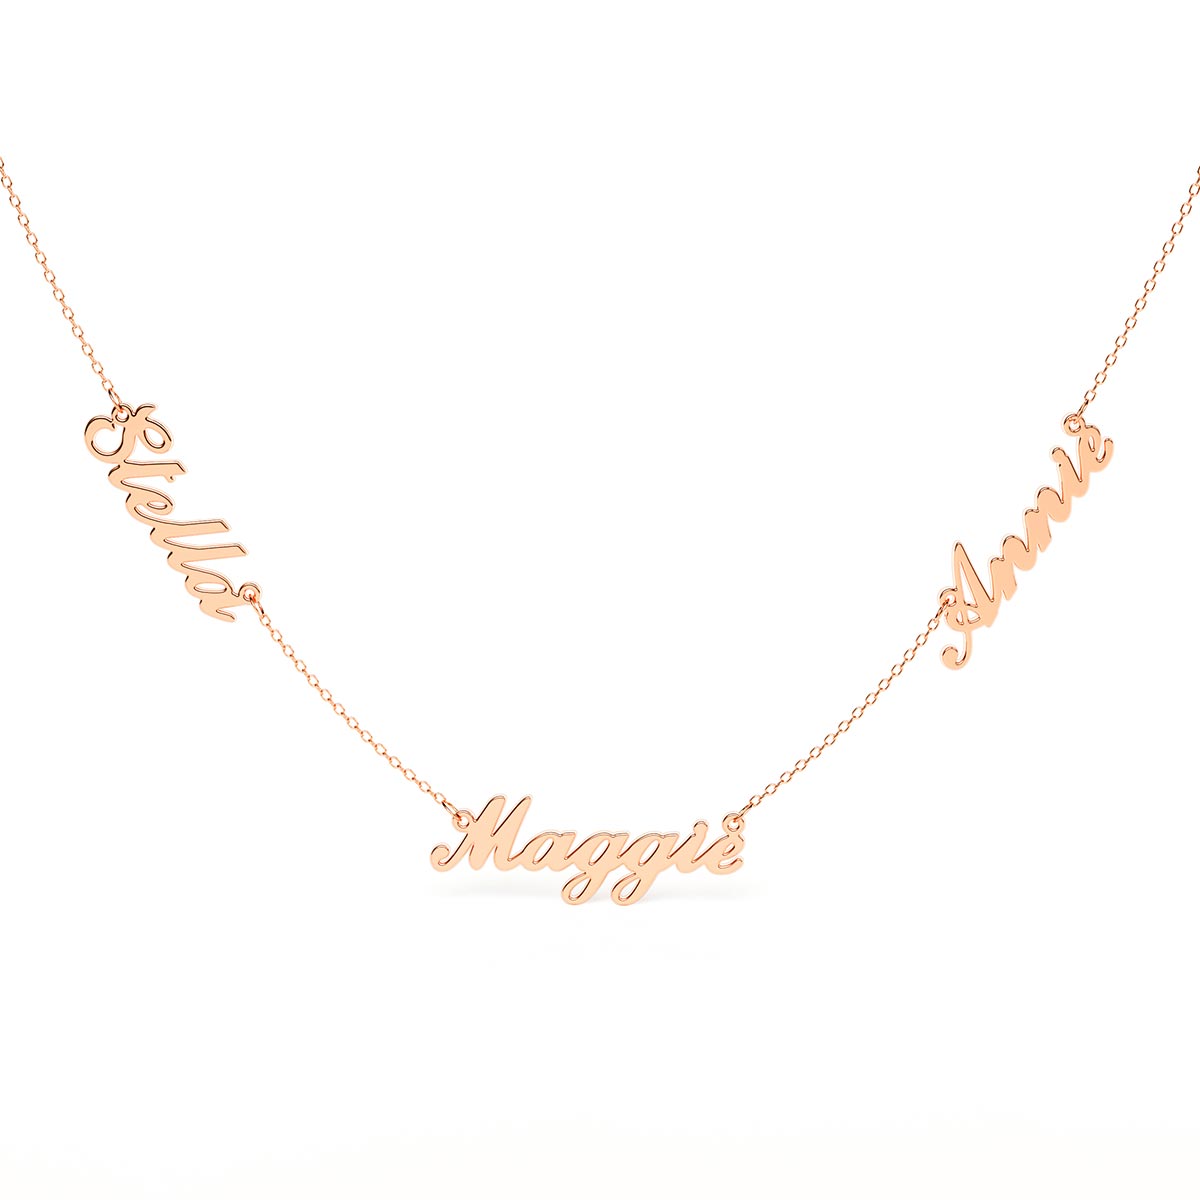 Personalized 3 Name Necklace